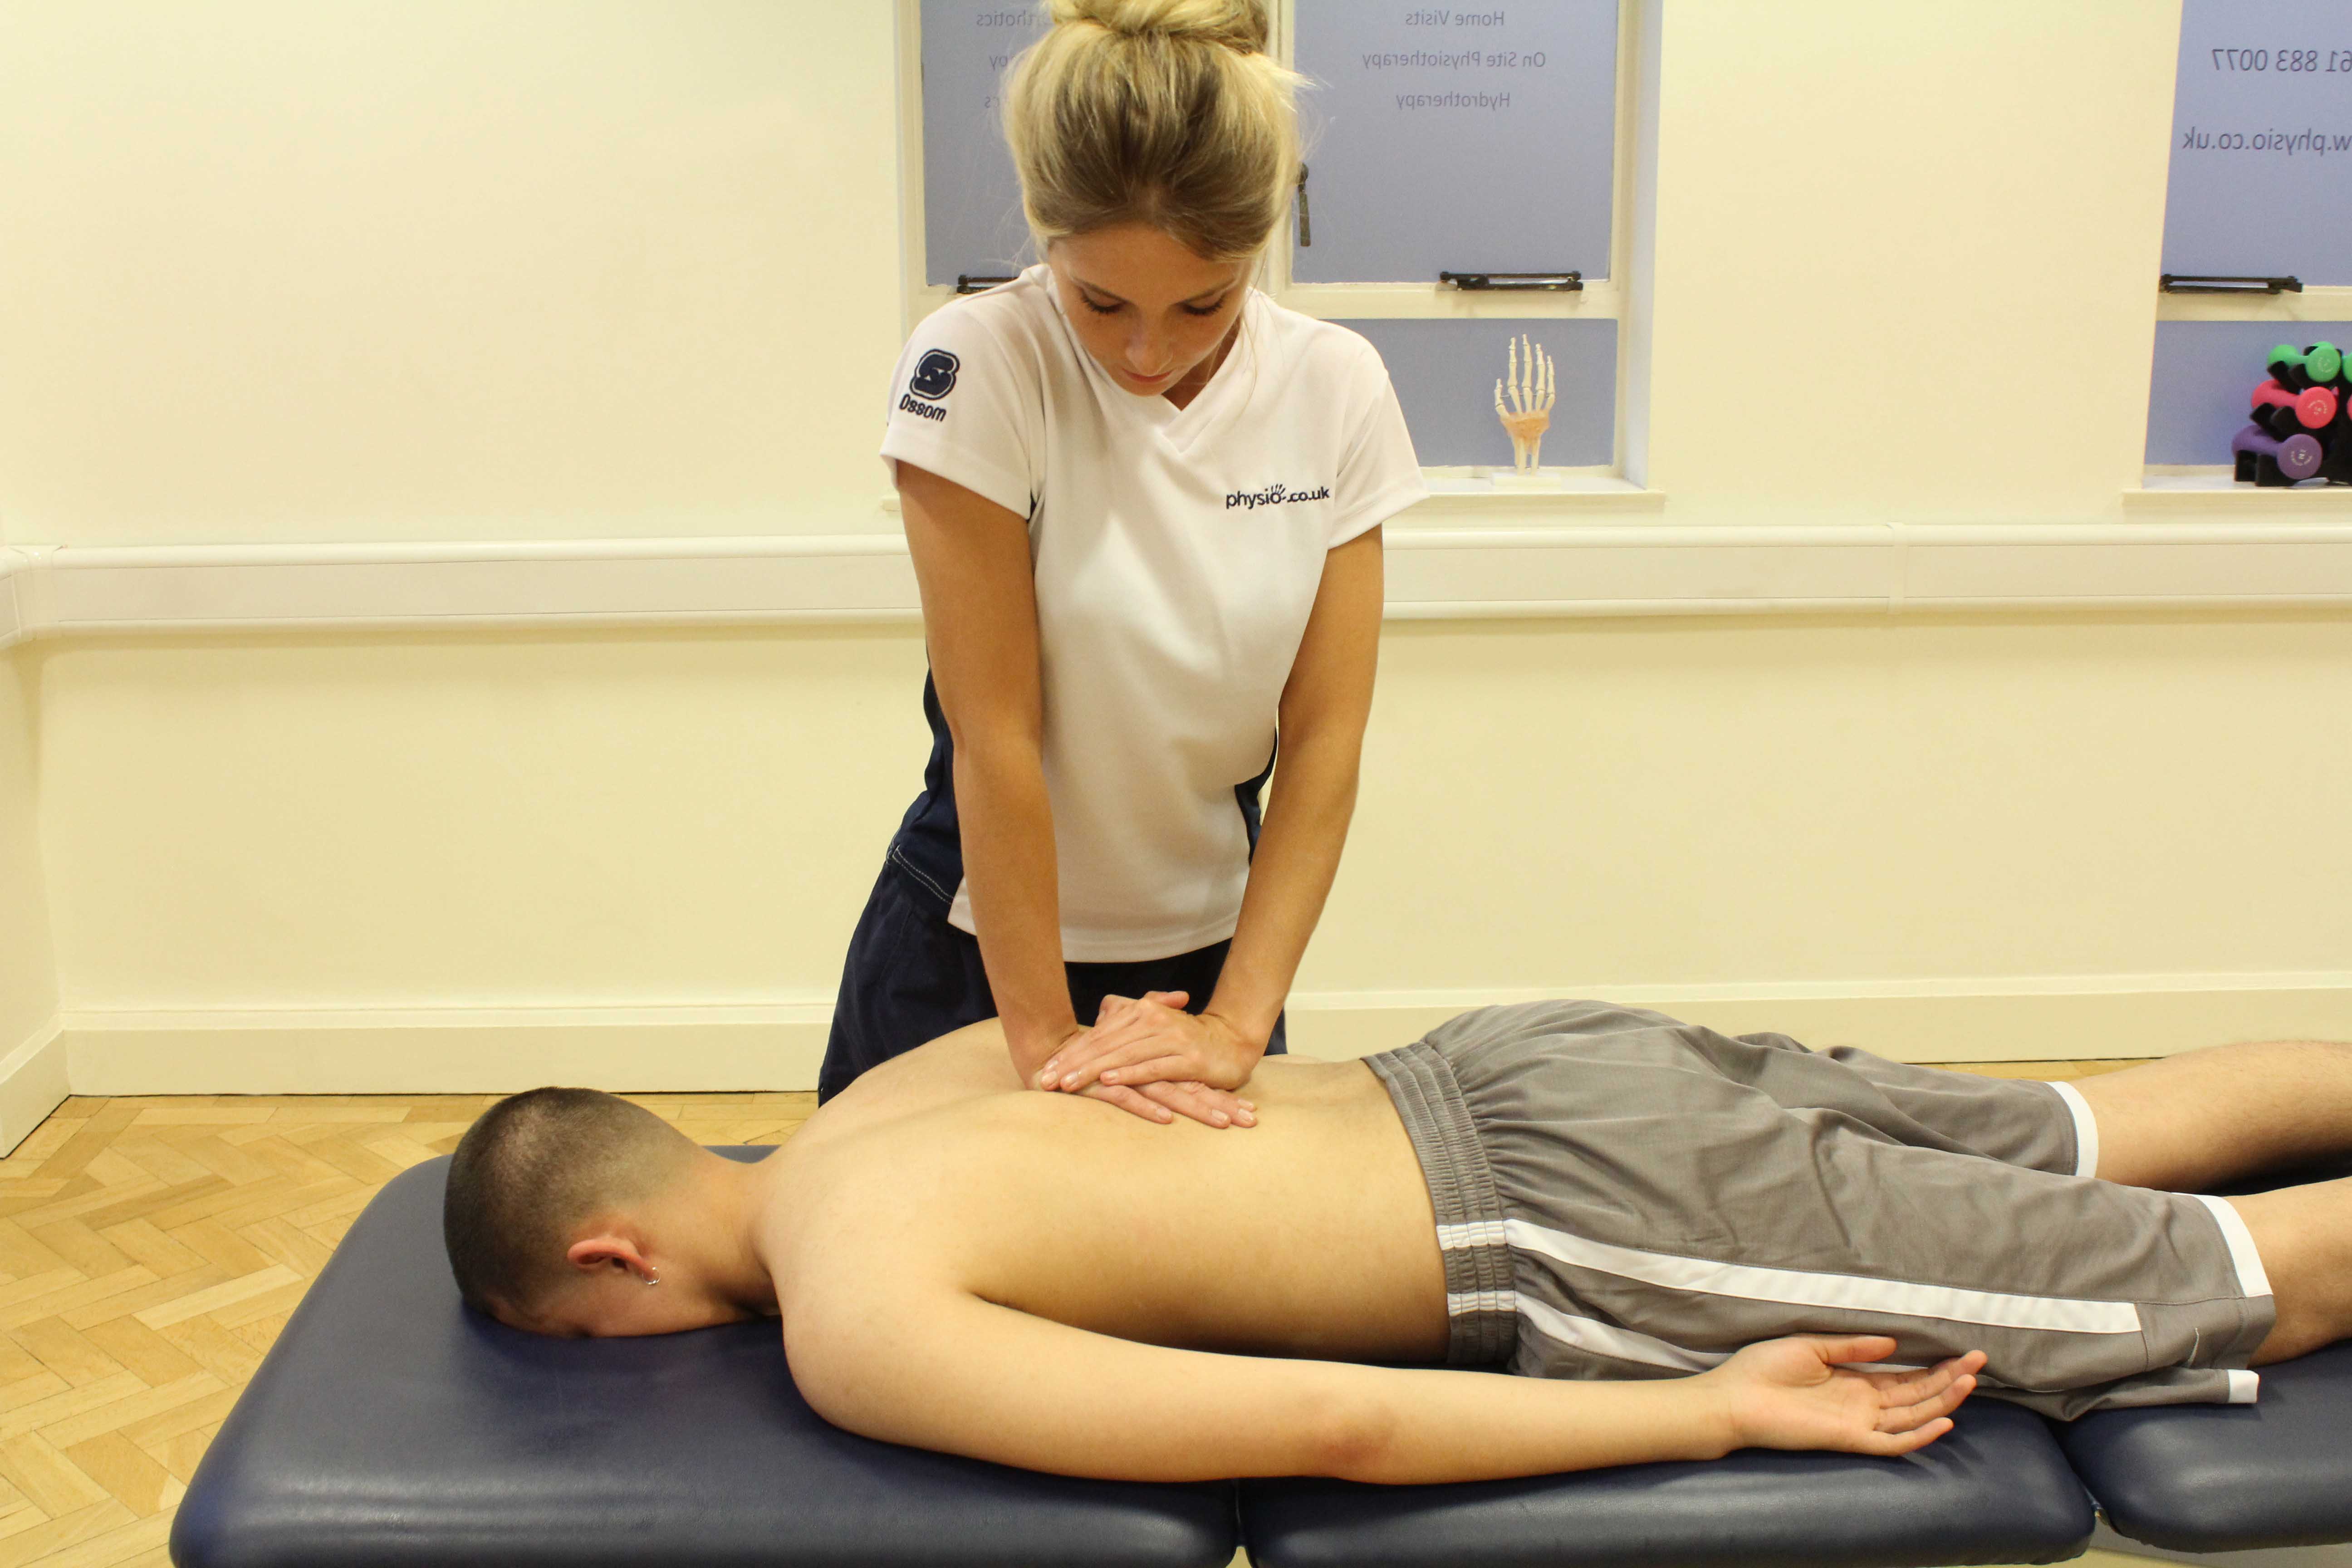 compression massage technique applied to thoracic spine